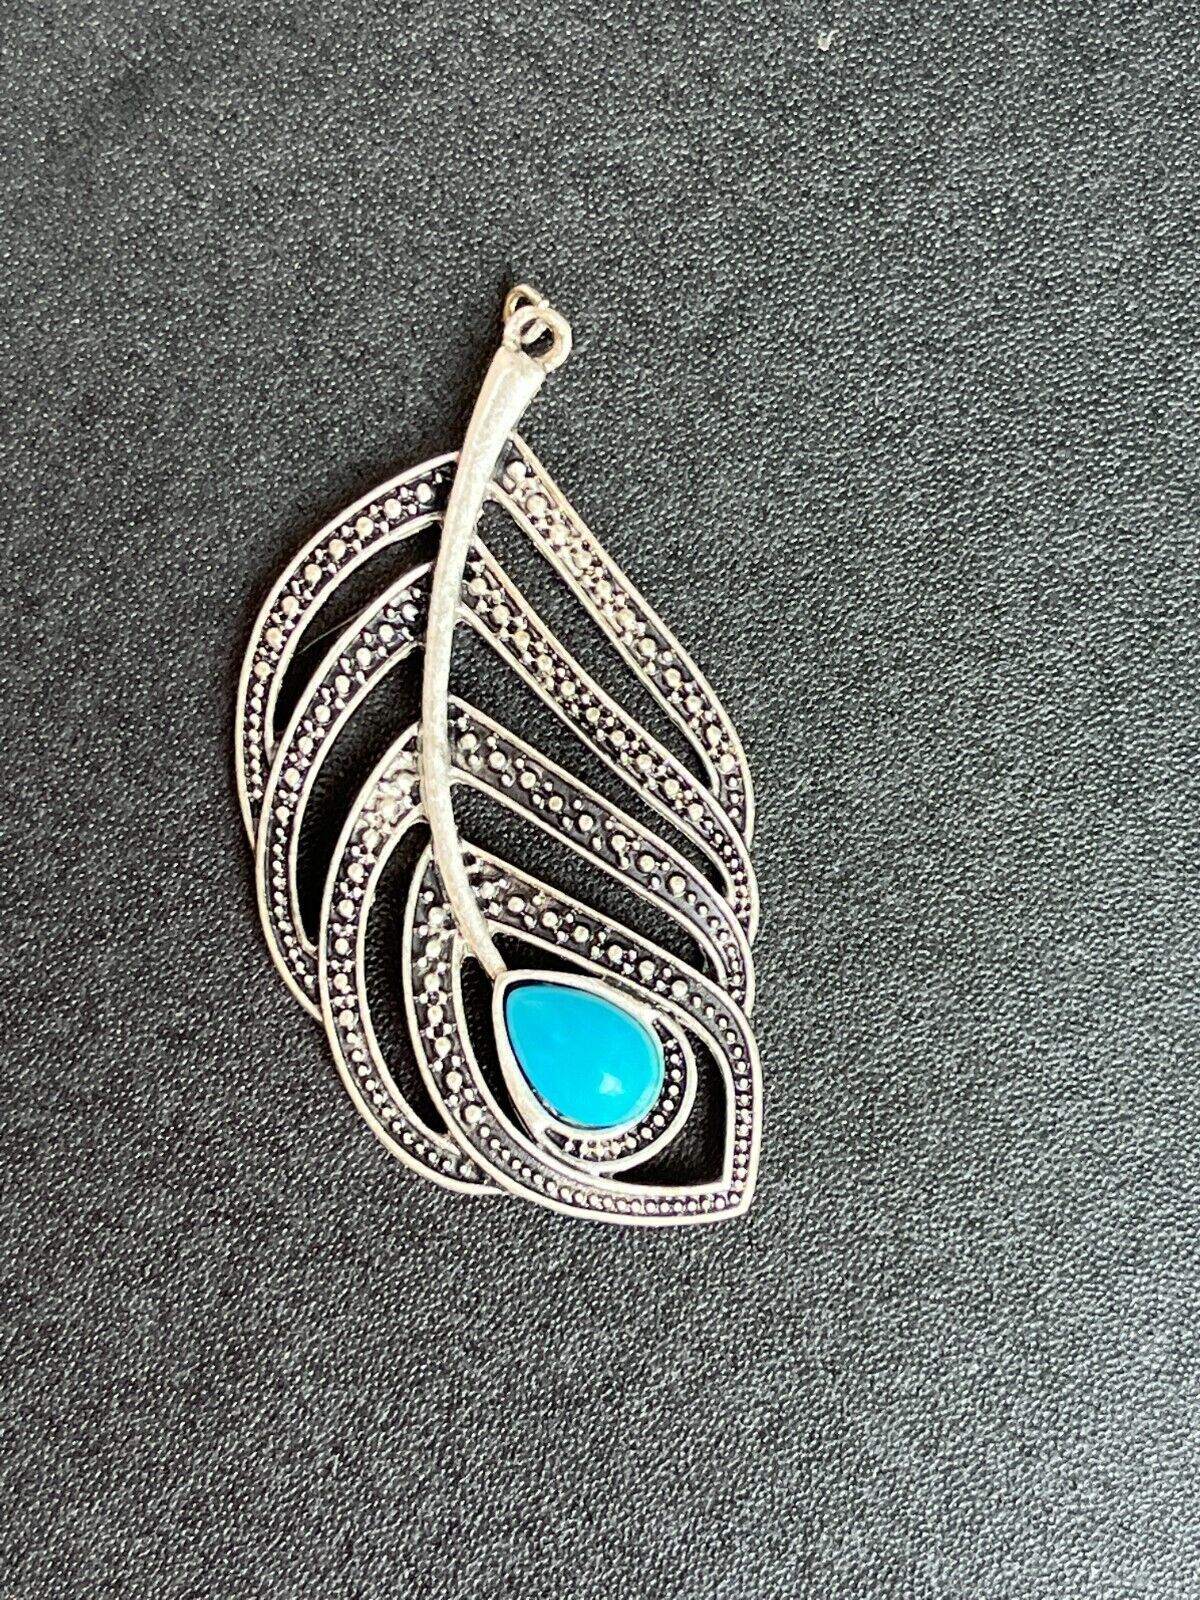 Primary image for Large Faux Marcasite Silvertone Feather w Plastic Turquoise Colored Teardrop Cab